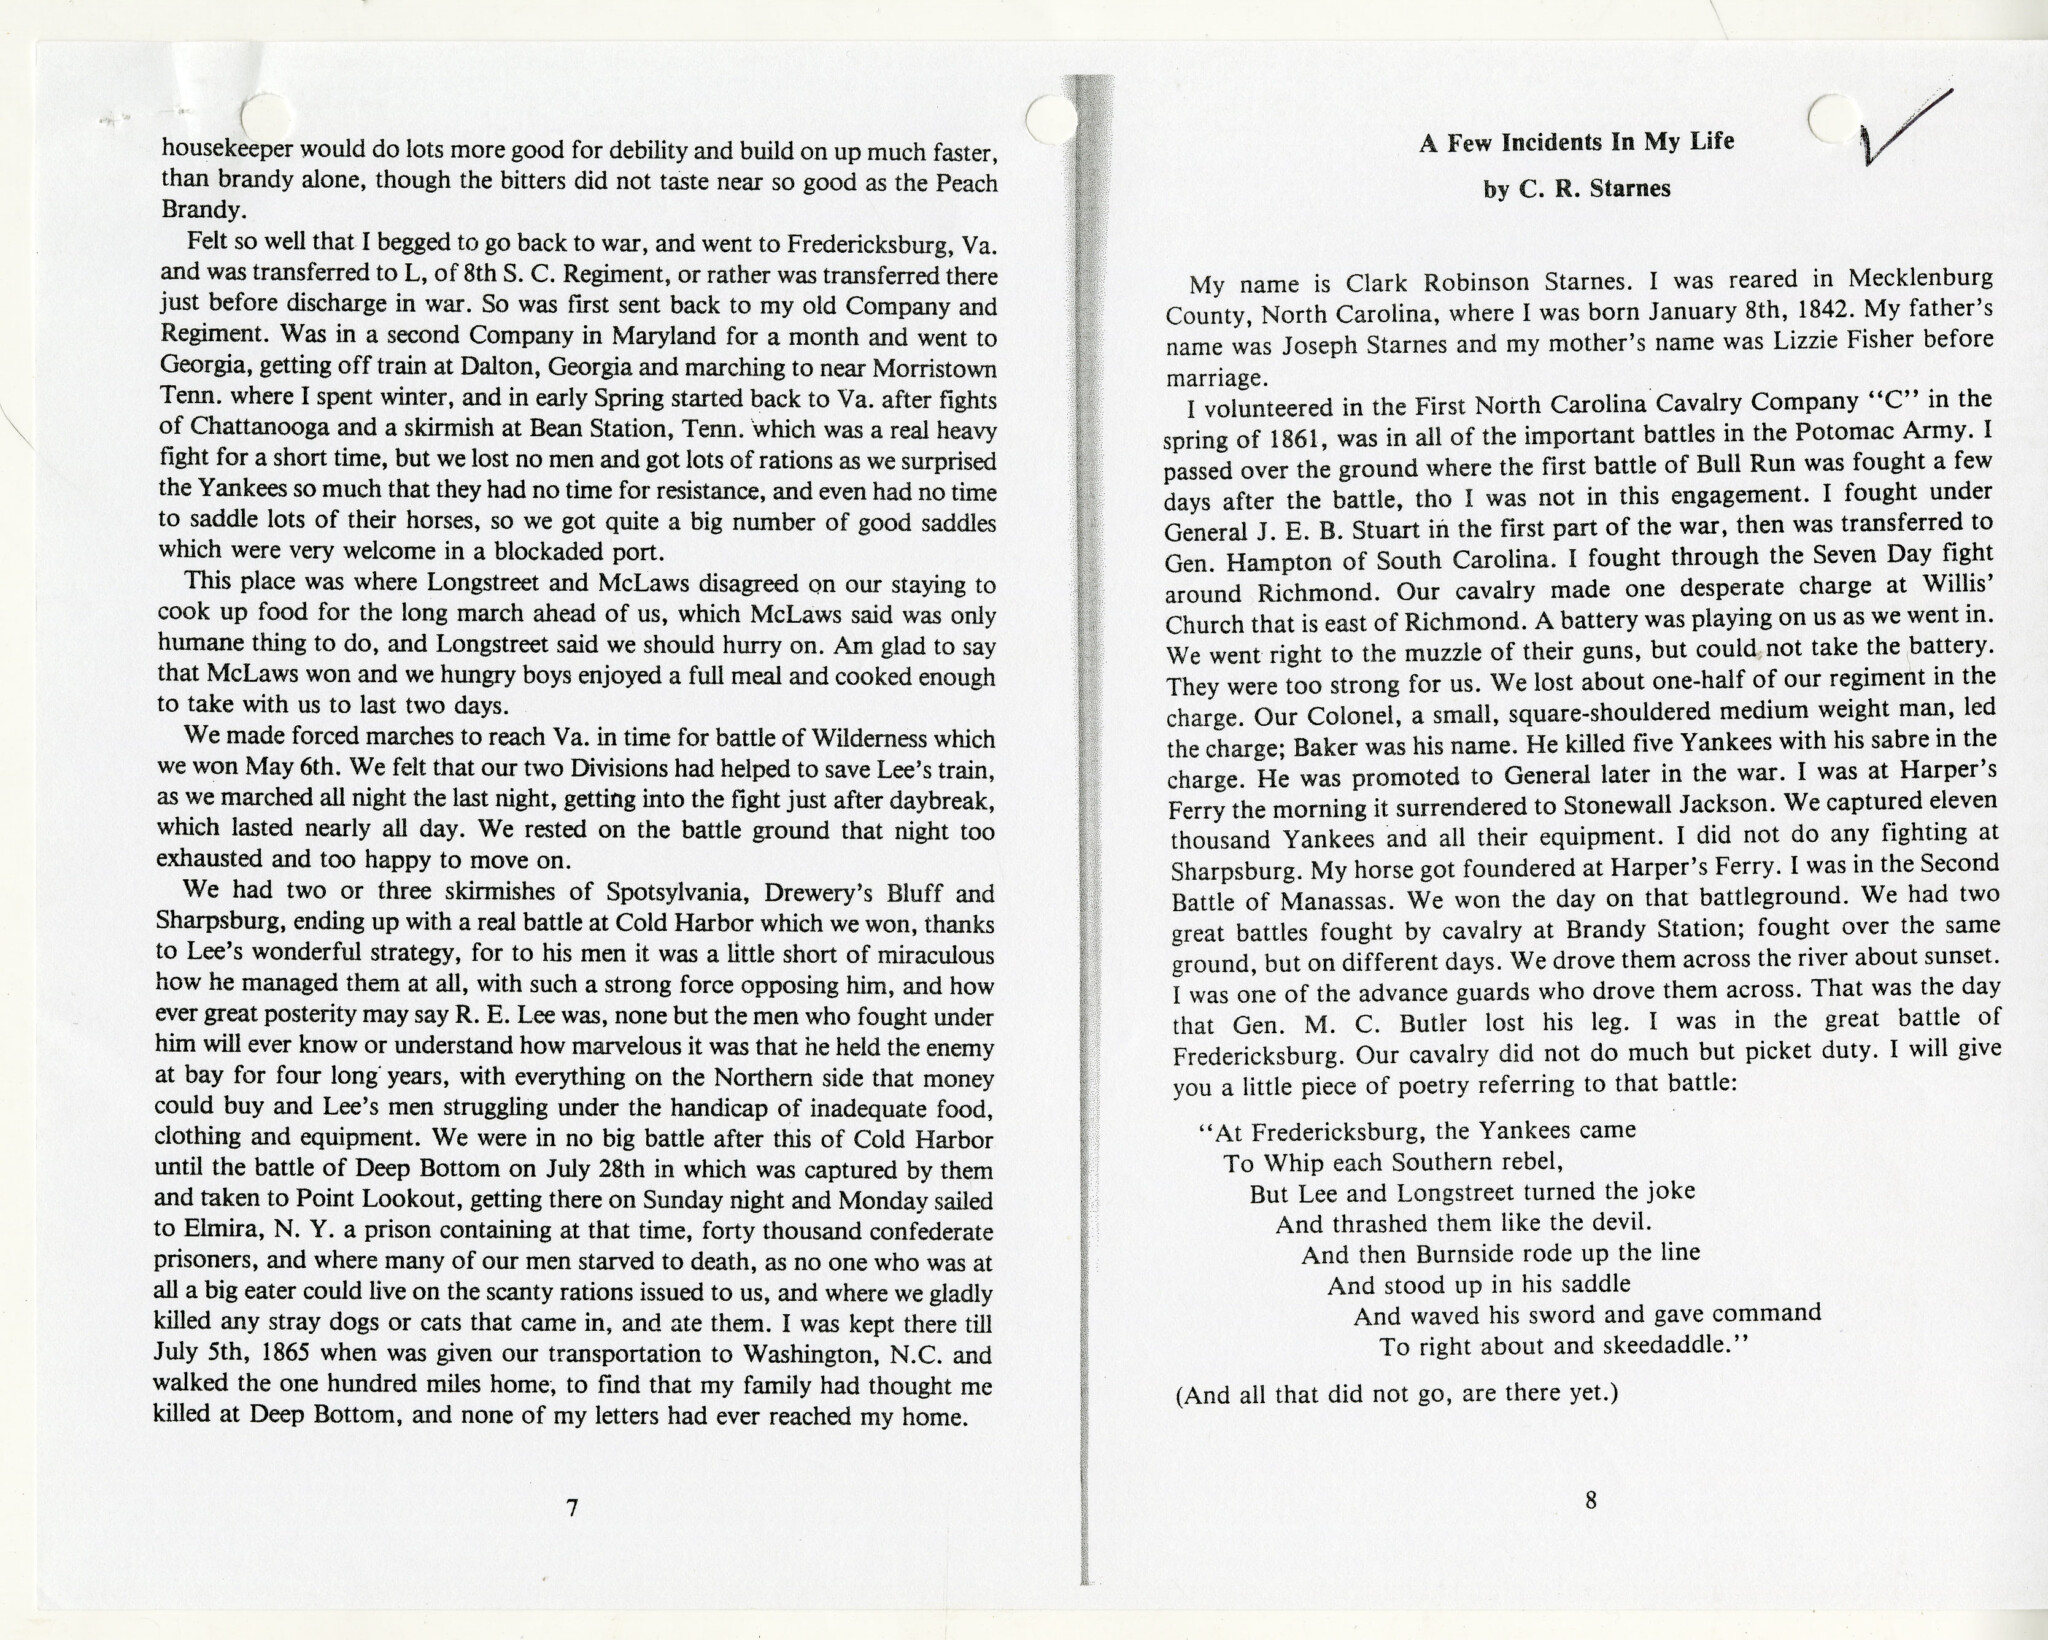 HISTORY OF THE WAR AND THE LOCAL KKK - Wm. B. White Collection - WU Pettus Archives p. 1